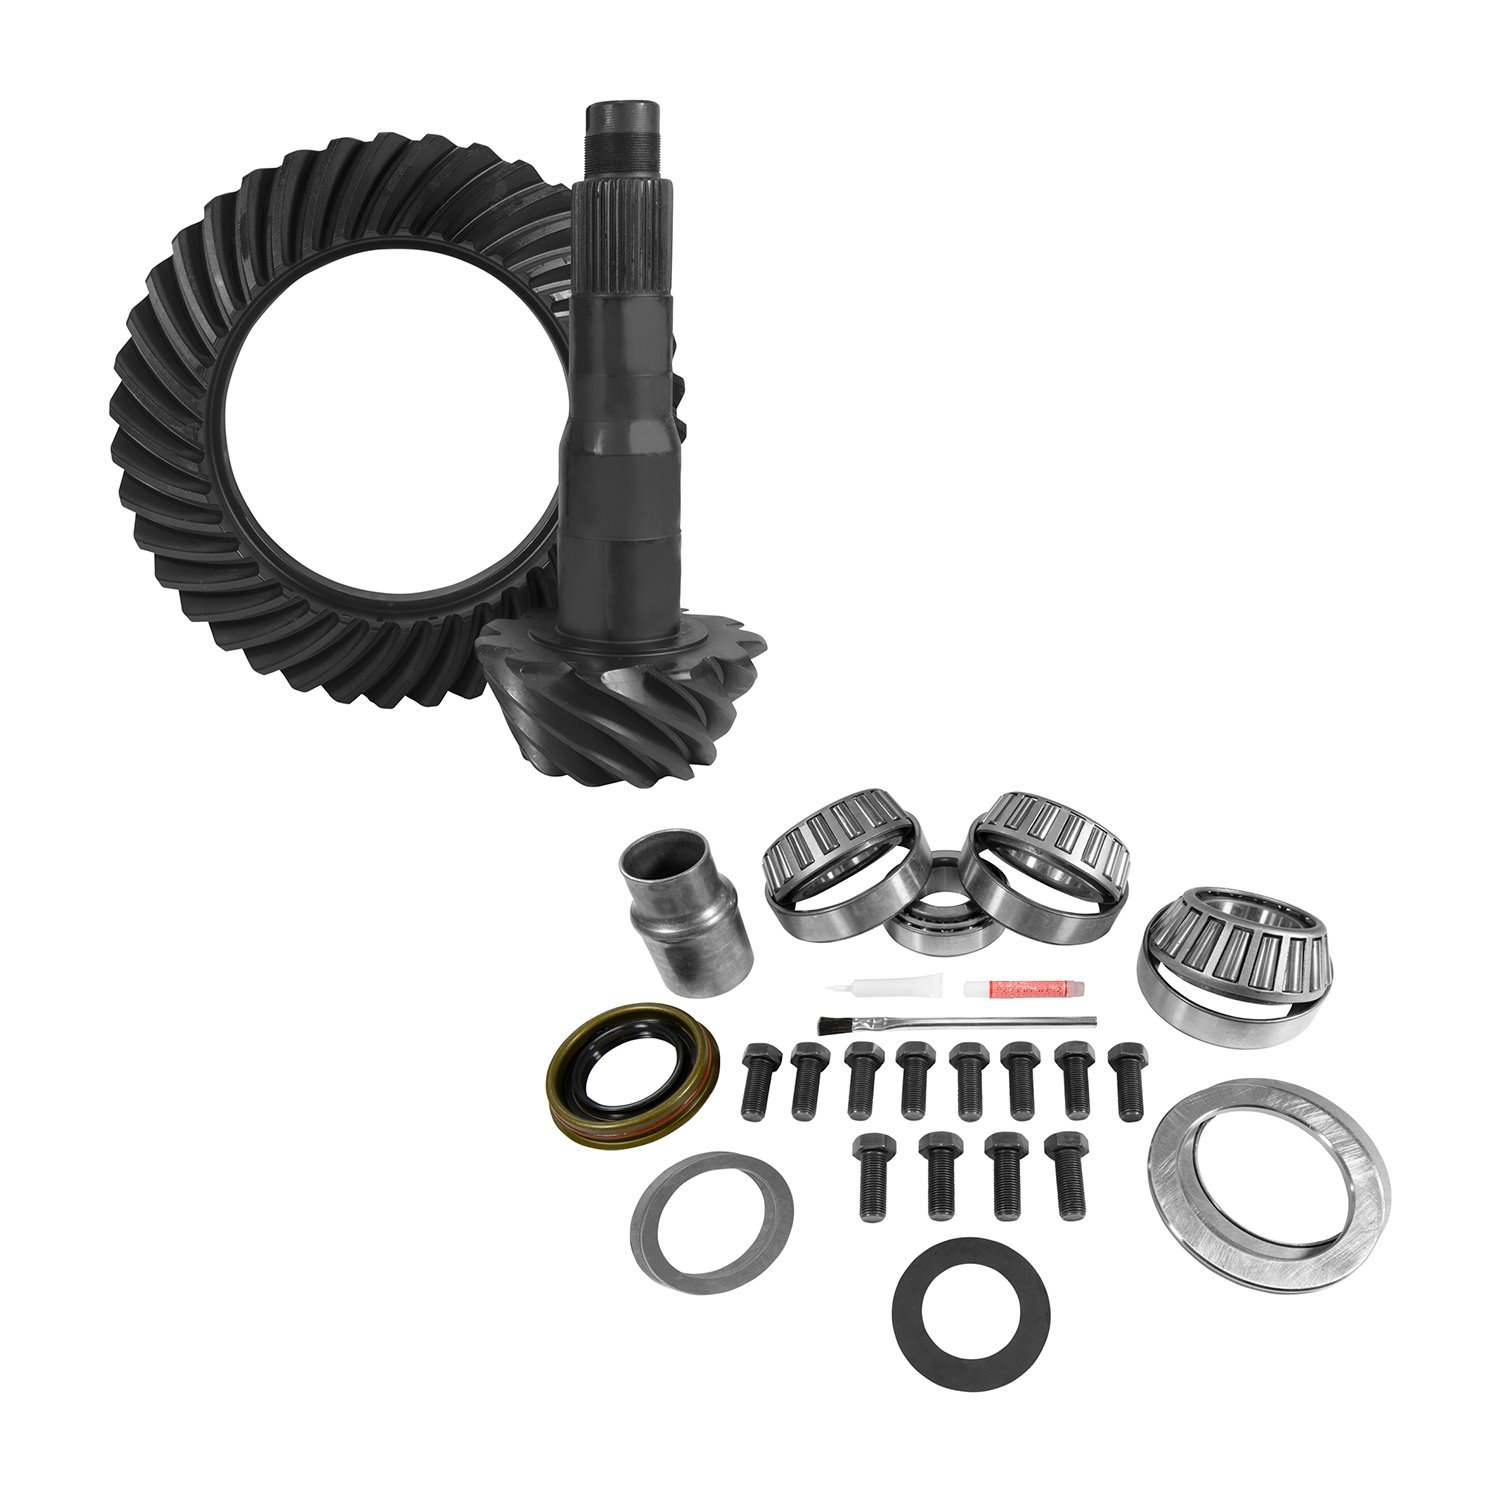 USA Standard 10864 10.5 in. Ford 4.88 Rear Ring & Pinion And Install Kit